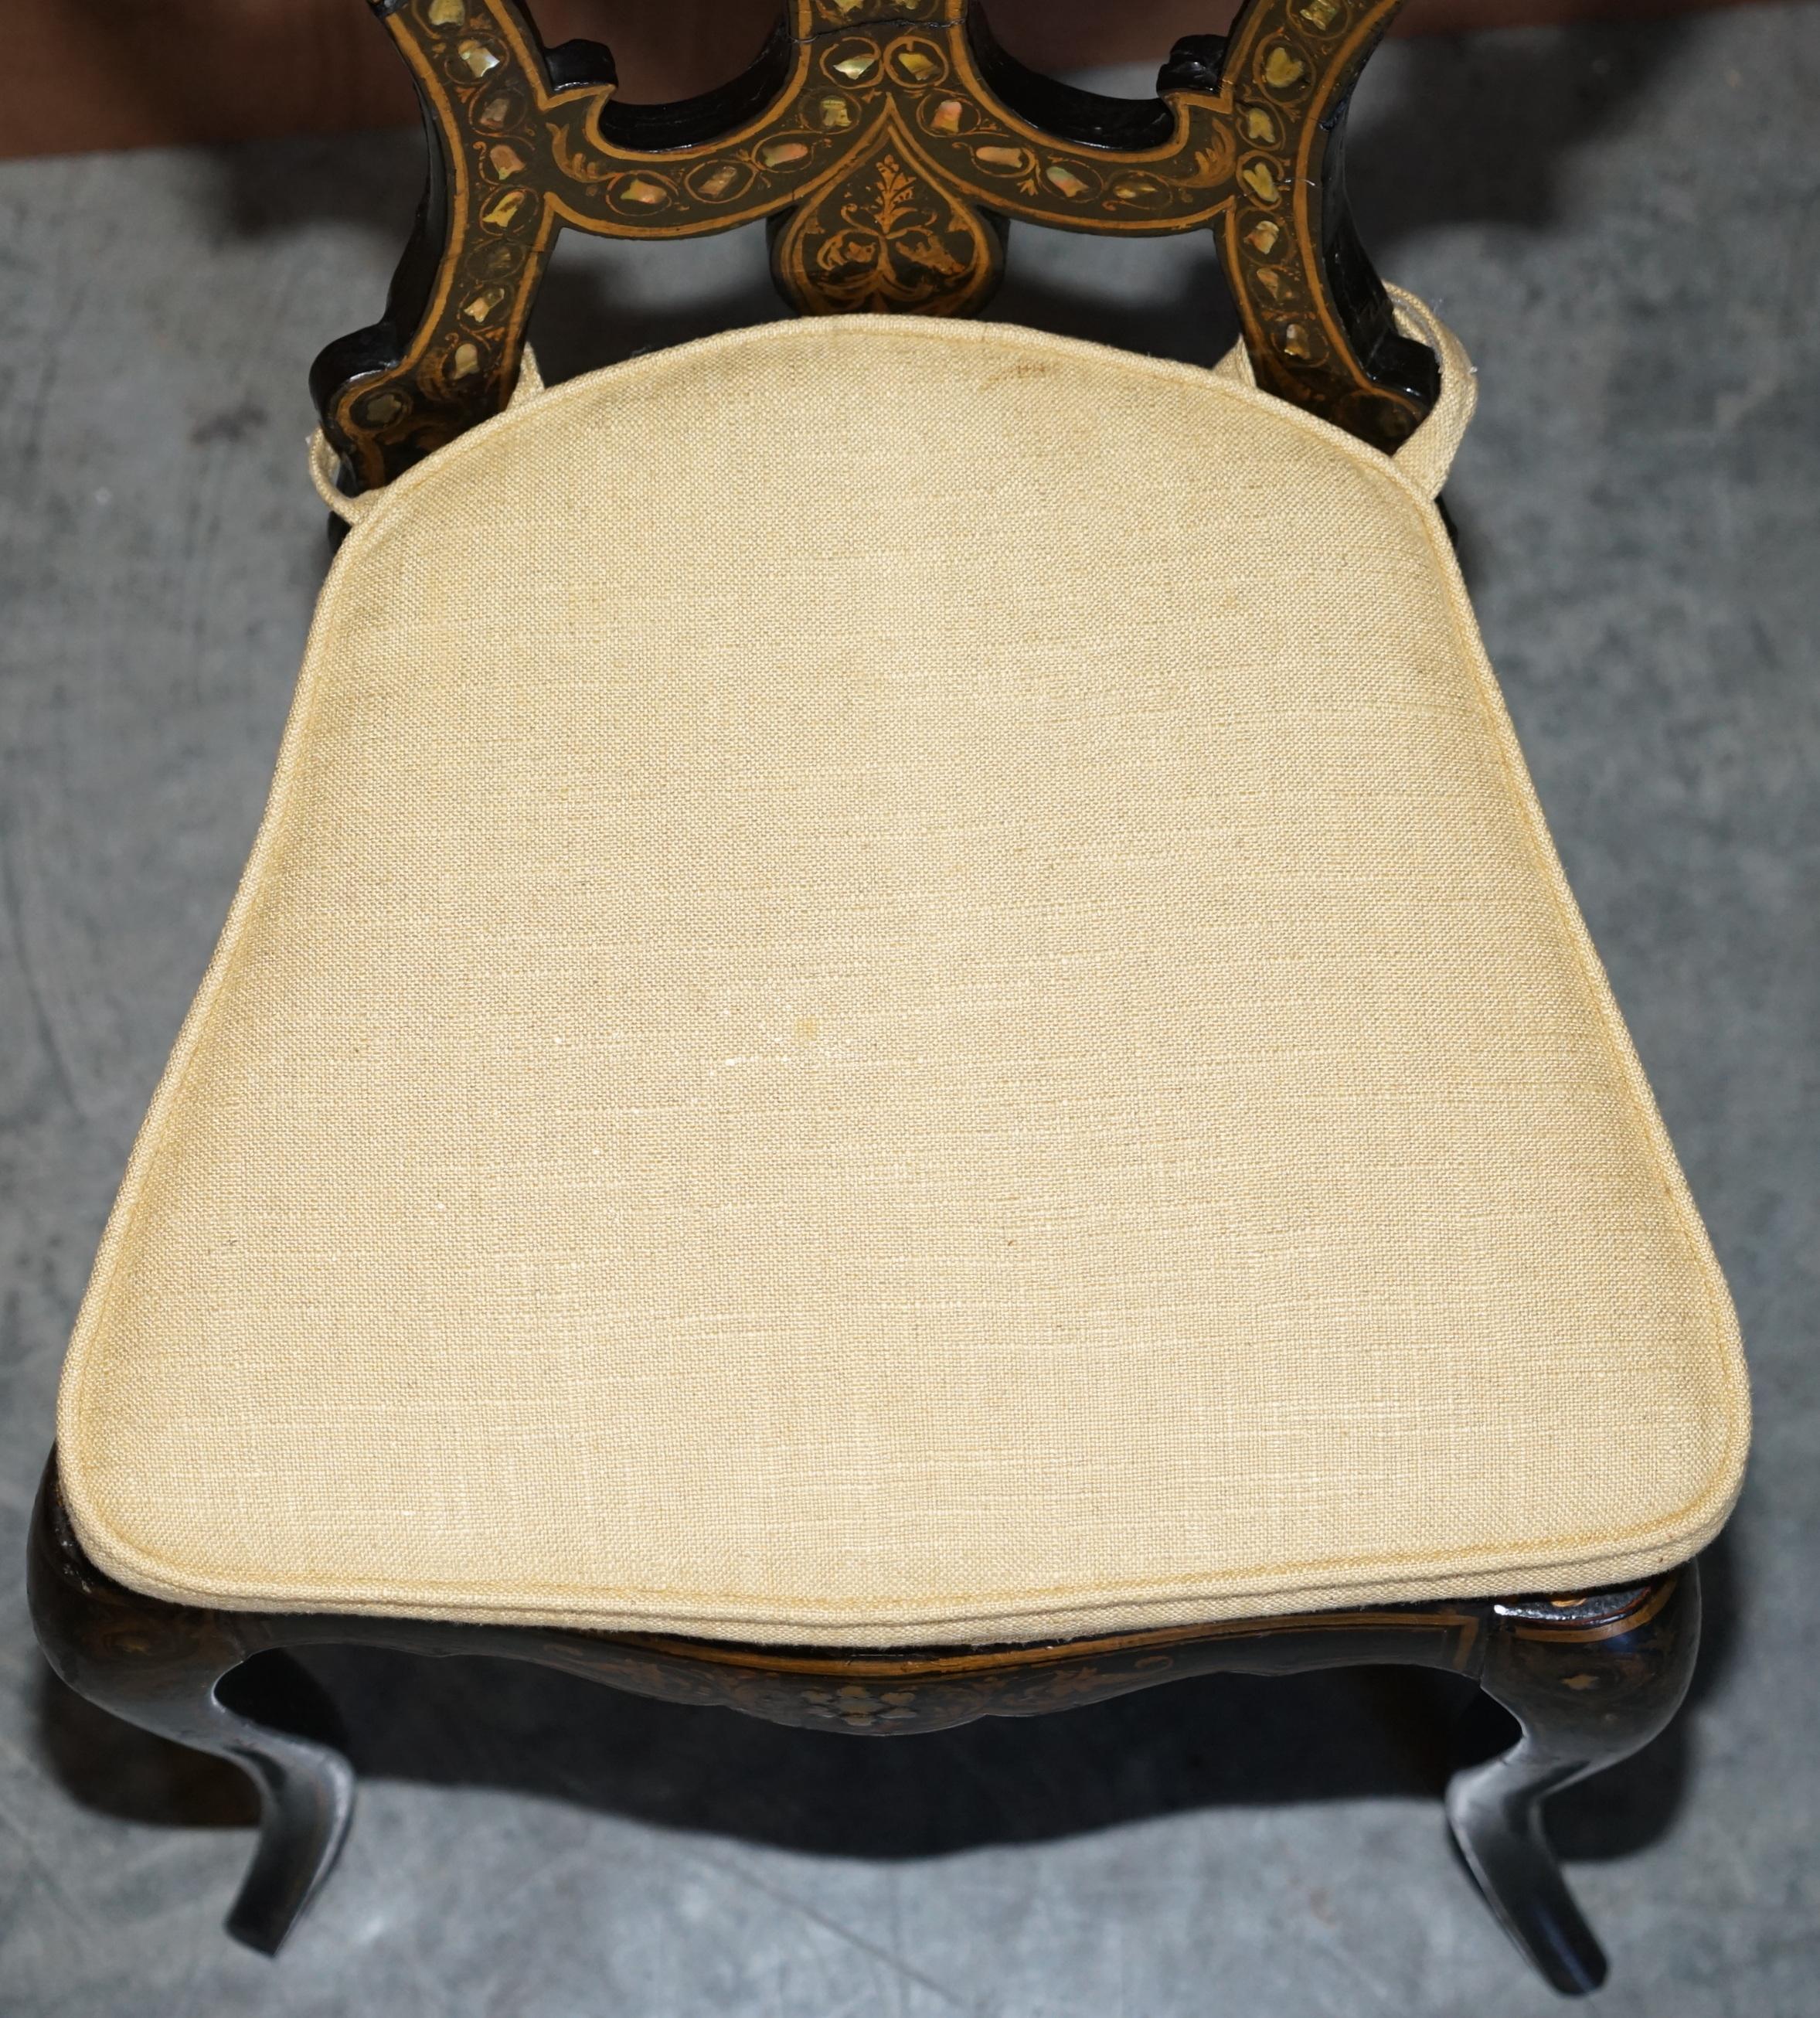 Stamped circa 1815 Jennens & Bettridge Ebonsied Mother of Pearl Regency Chair For Sale 2